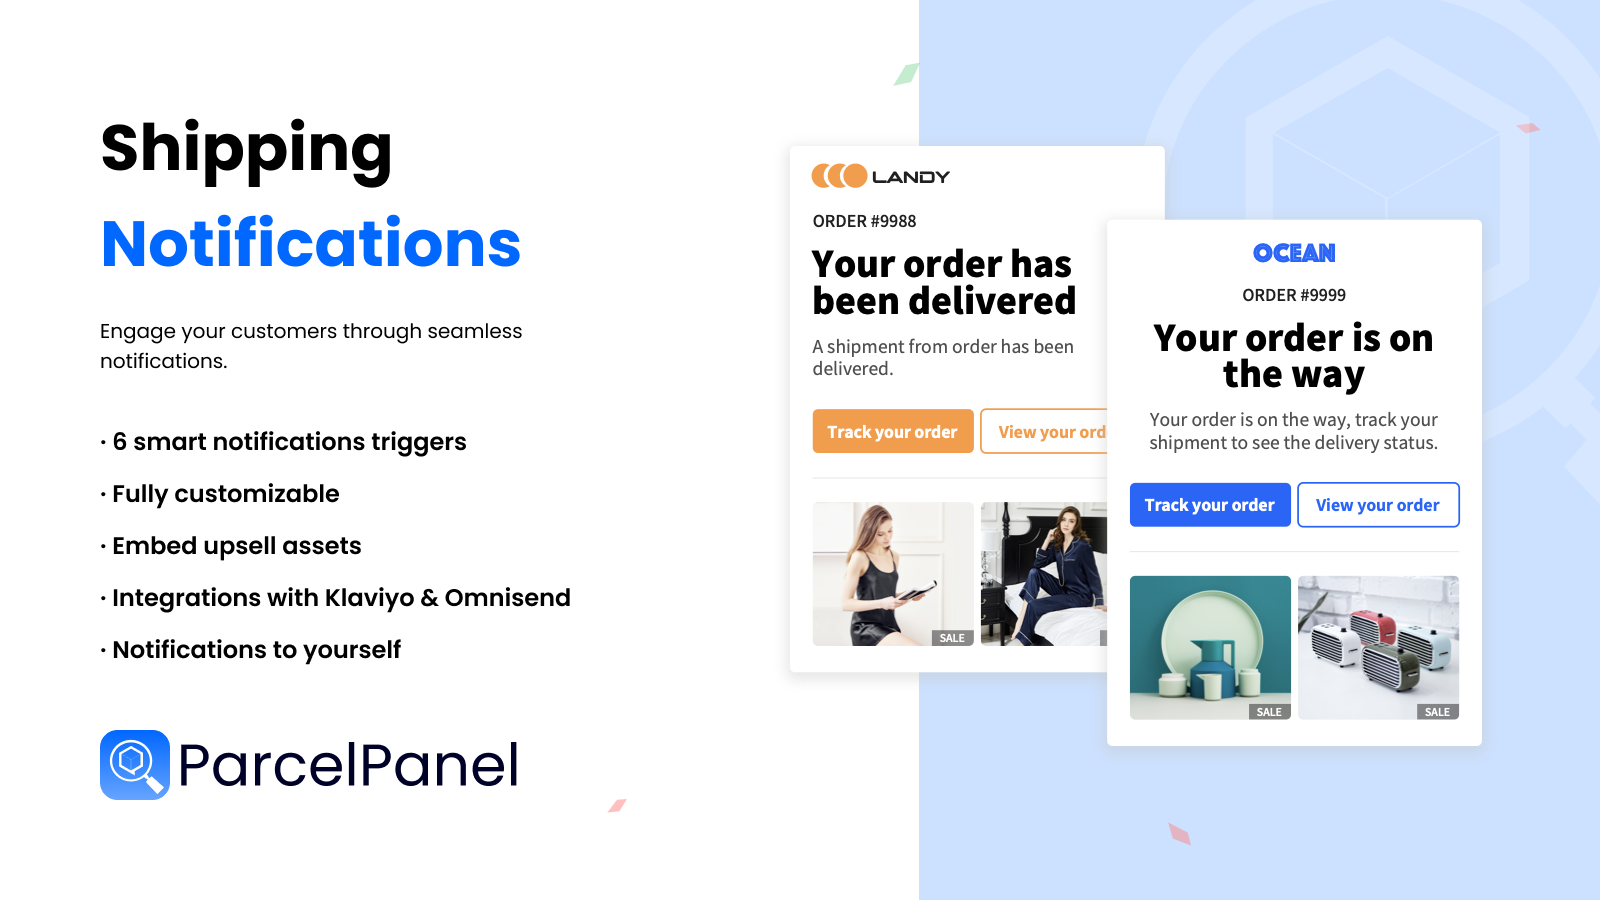 Engage customers through seamless shipping notifications